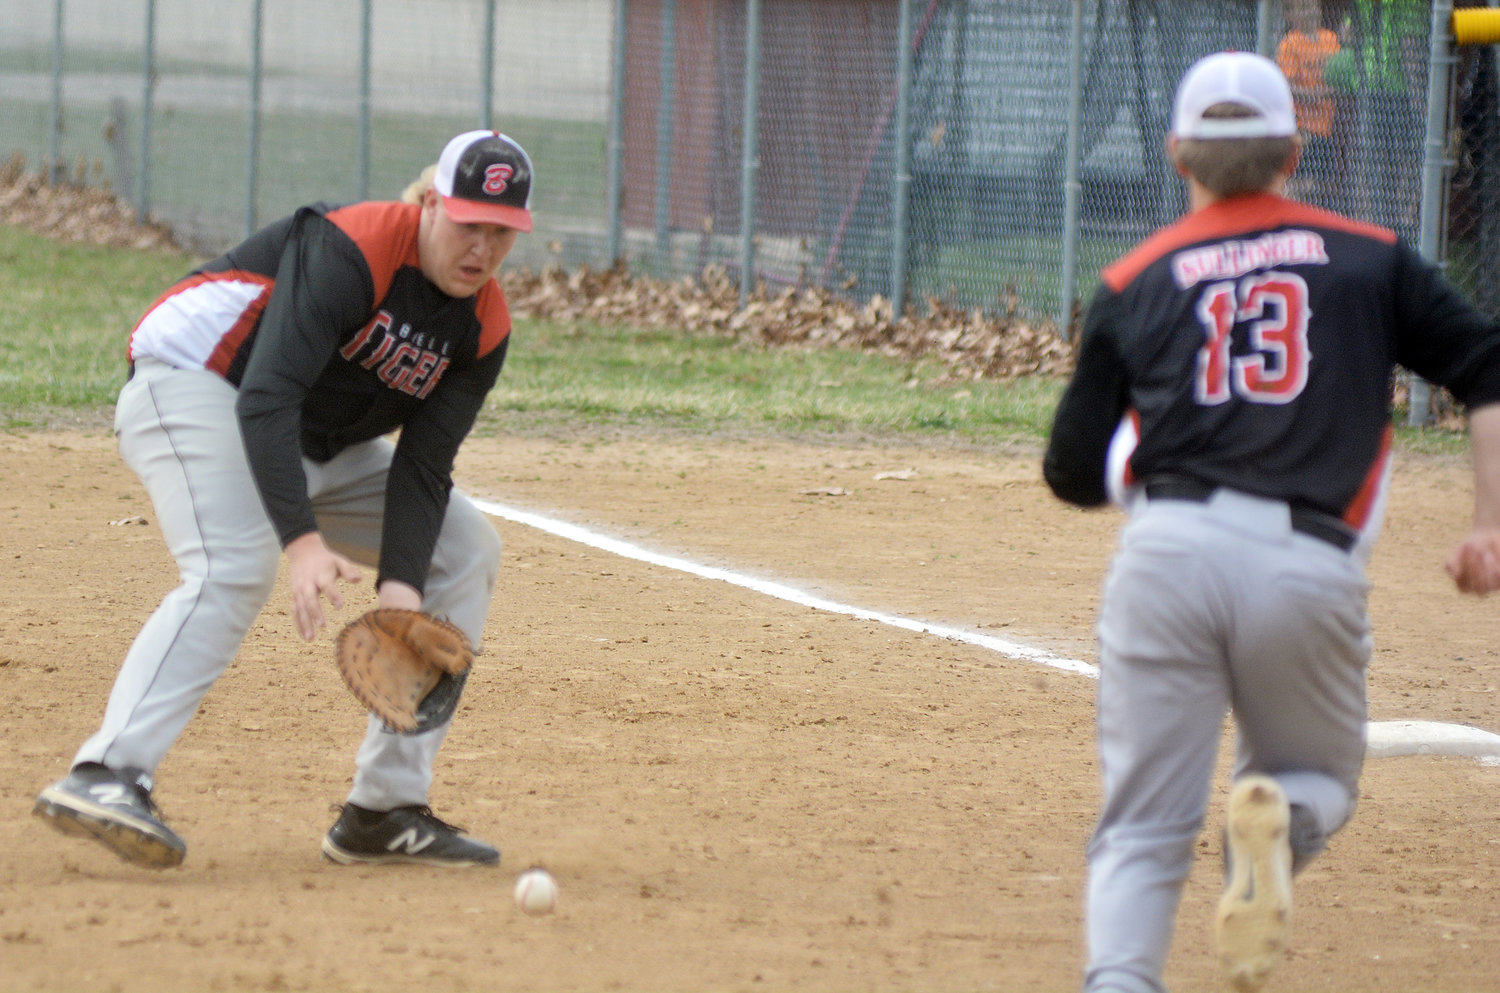 Zane Strunk (left) fields a ground ball while Isaiah Sullinger (above, right) charges towards first base to cover the bag while Strunk is fielding the baseball.